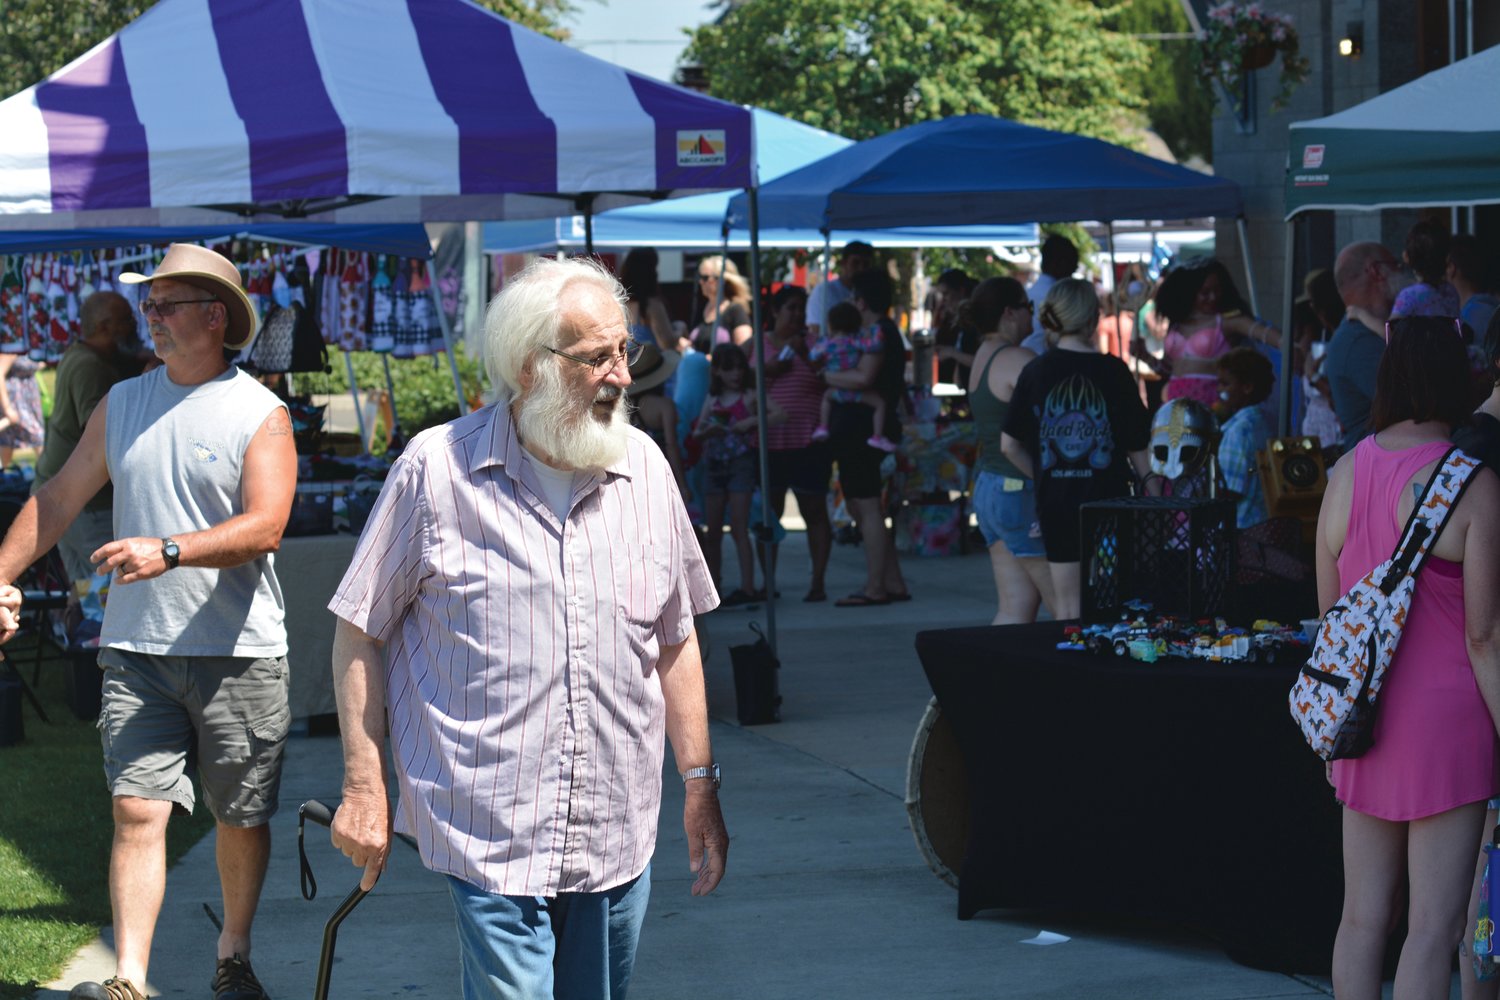 Attendees of the Mermaid Fest at Yelm City Park stroll through a variety of vendors who set up shop at Yelm City Park on Saturday, July 30.